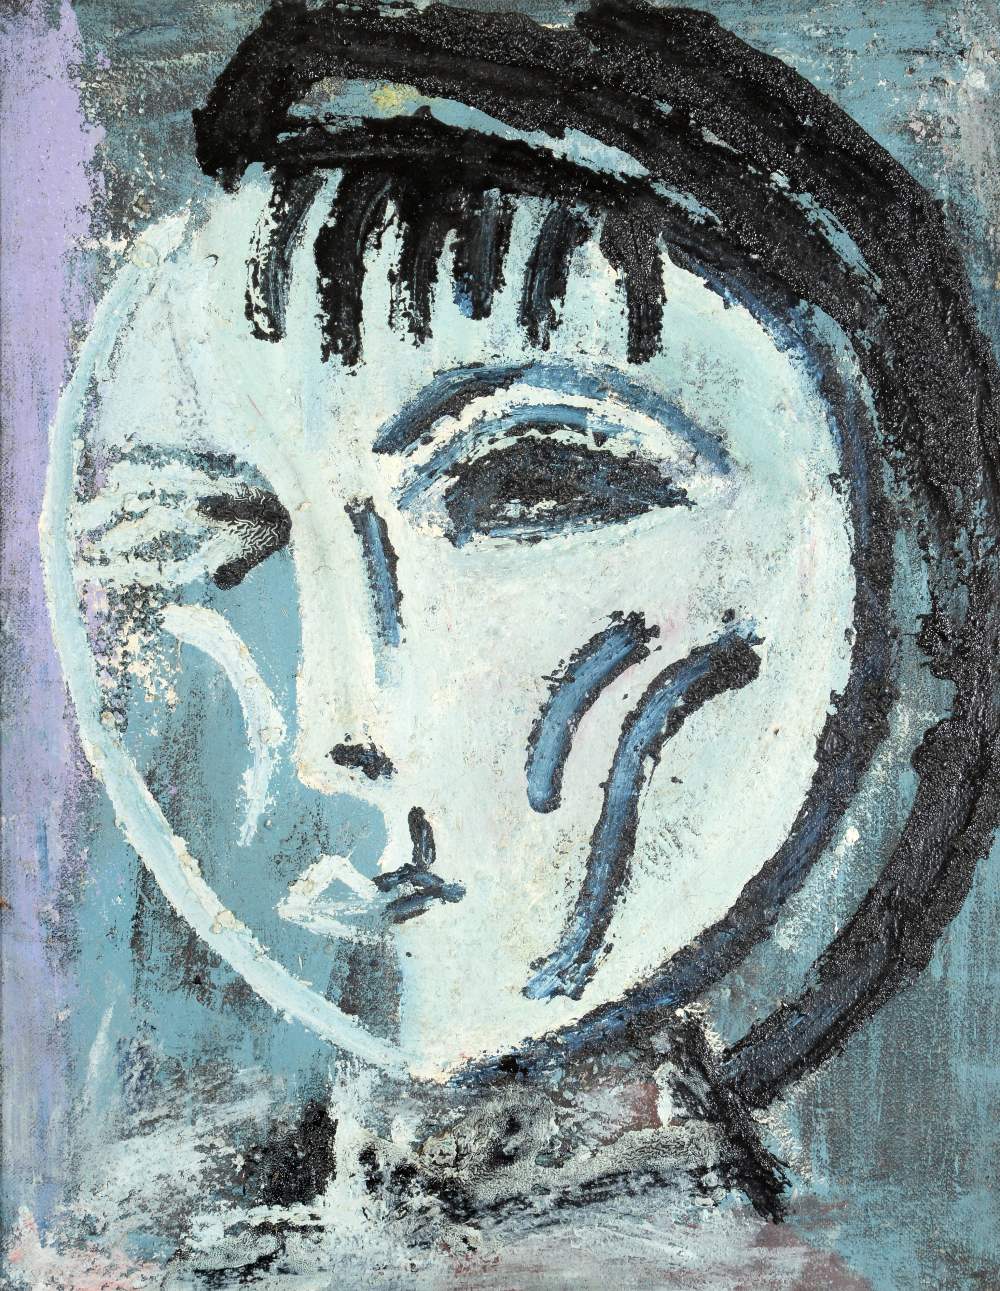 Joash Woodrow (1927-2006) ''Young Woman in Blue and White'' Oil on hessian, circa 1965, 90.5cm by